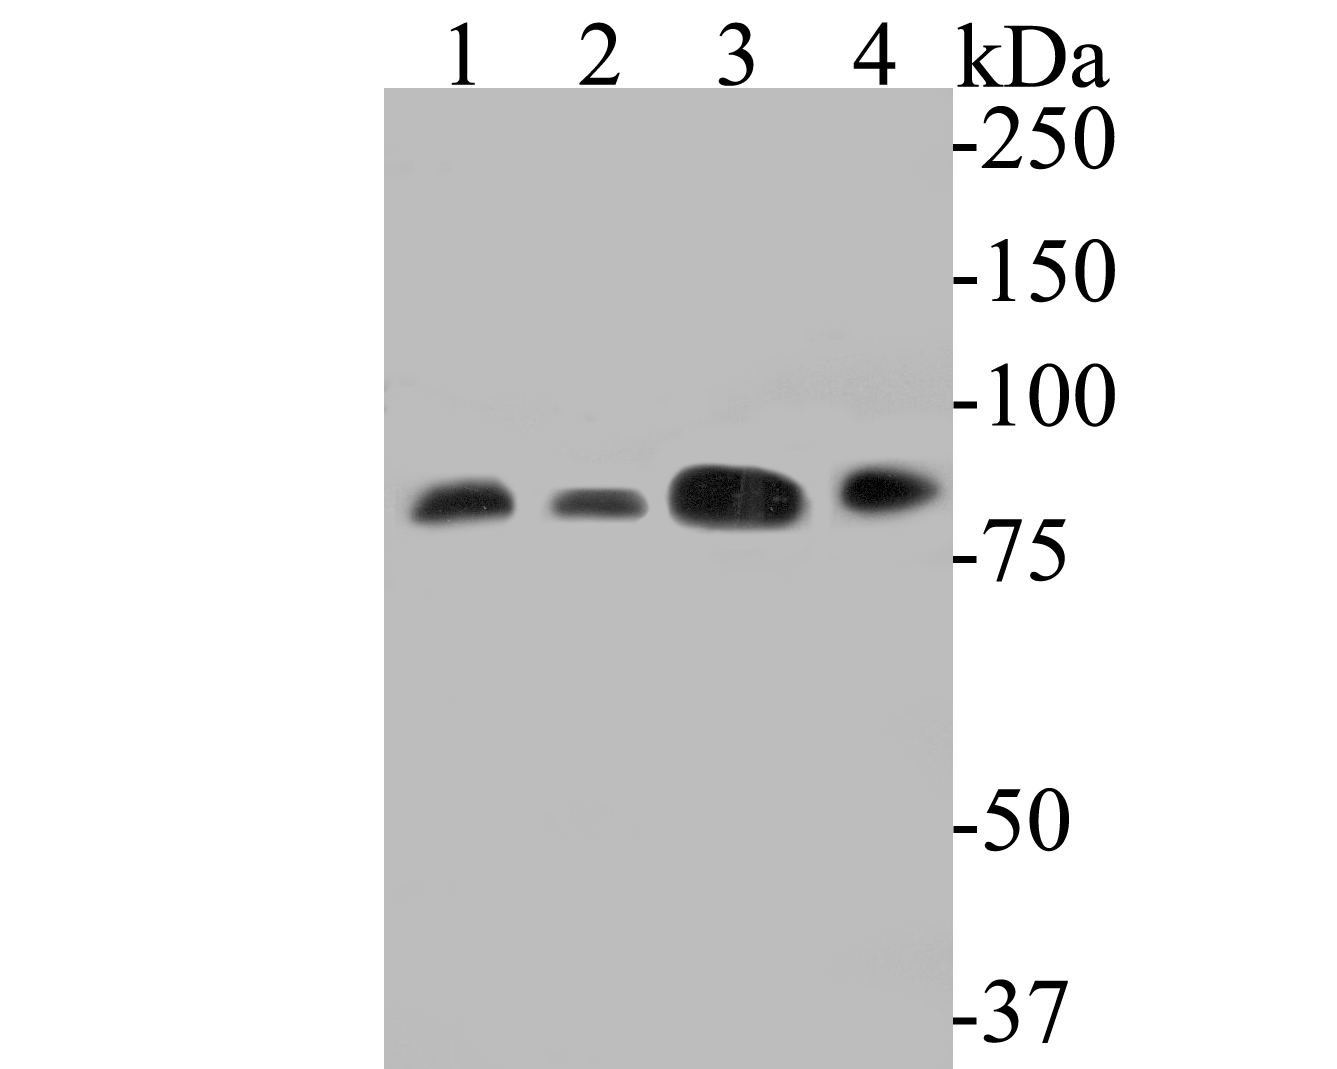 Western blot analysis of DBF4 on different lysates. Proteins were transferred to a PVDF membrane and blocked with 5% BSA in PBS for 1 hour at room temperature. The primary antibody (ET7110-31, 1/500) was used in 5% BSA at room temperature for 2 hours. Goat Anti-Rabbit IgG - HRP Secondary Antibody (HA1001) at 1:5,000 dilution was used for 1 hour at room temperature.<br />
Positive control: <br />
Lane 1: 293T cell lysate<br />
Lane 2: Hela cell lysate<br />
Lane 3: SW480 cell lysate<br />
Lane 4: Jurkat cell lysate